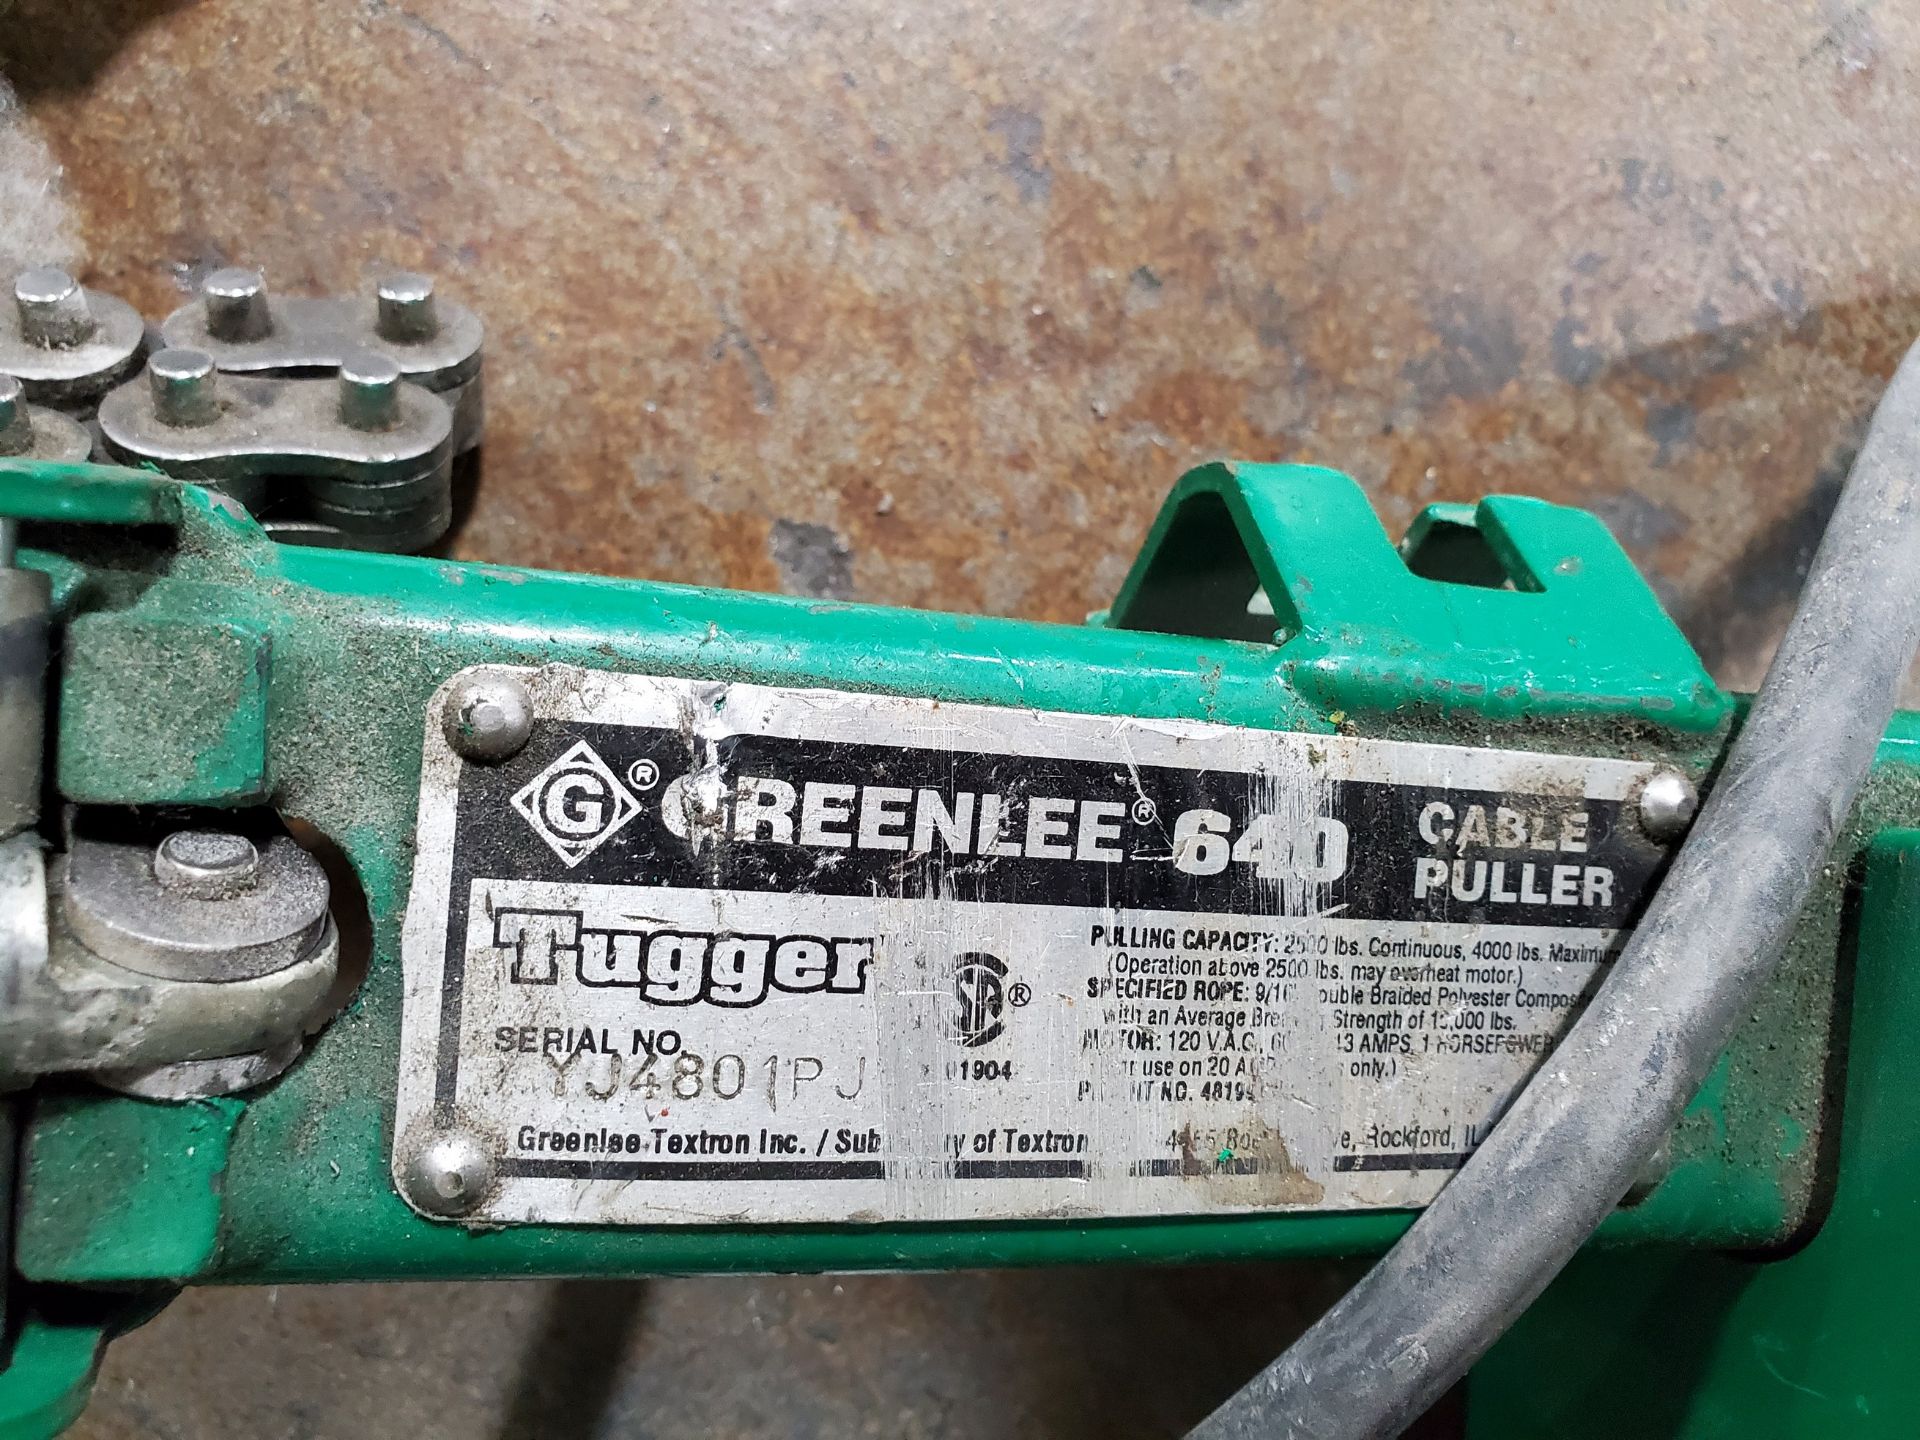 GREENLEE TUGGER CABLE PULLER, MODEL 640 WITH GREENLEE 446 CABLE PULLER BOX WITH 442 PORTA-PULLER - Image 4 of 6